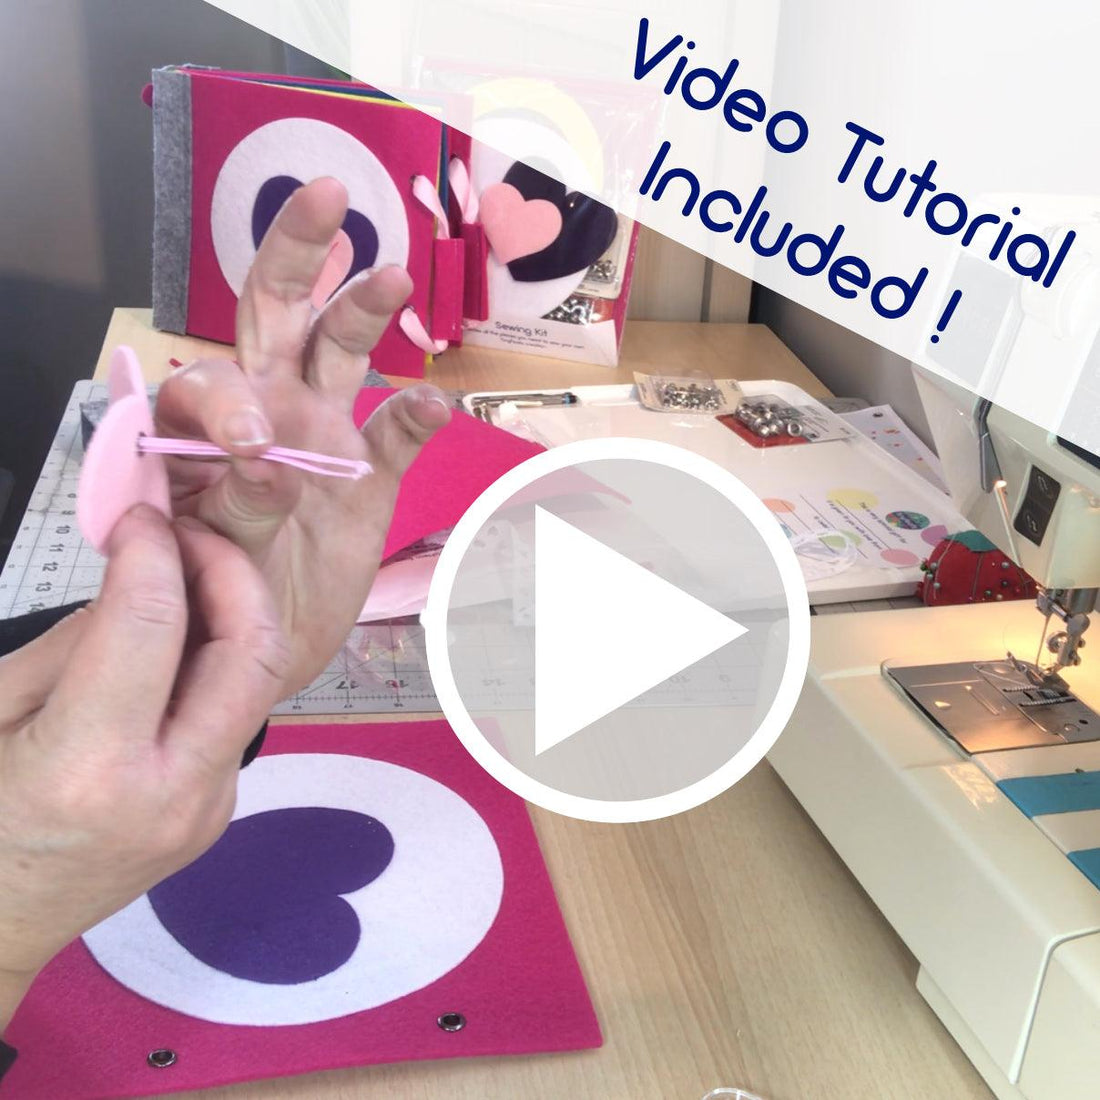 How to Sew a Quiet Book for Girls - TinyFeats Busy Book Binding Video Tutorial - tinyfeats